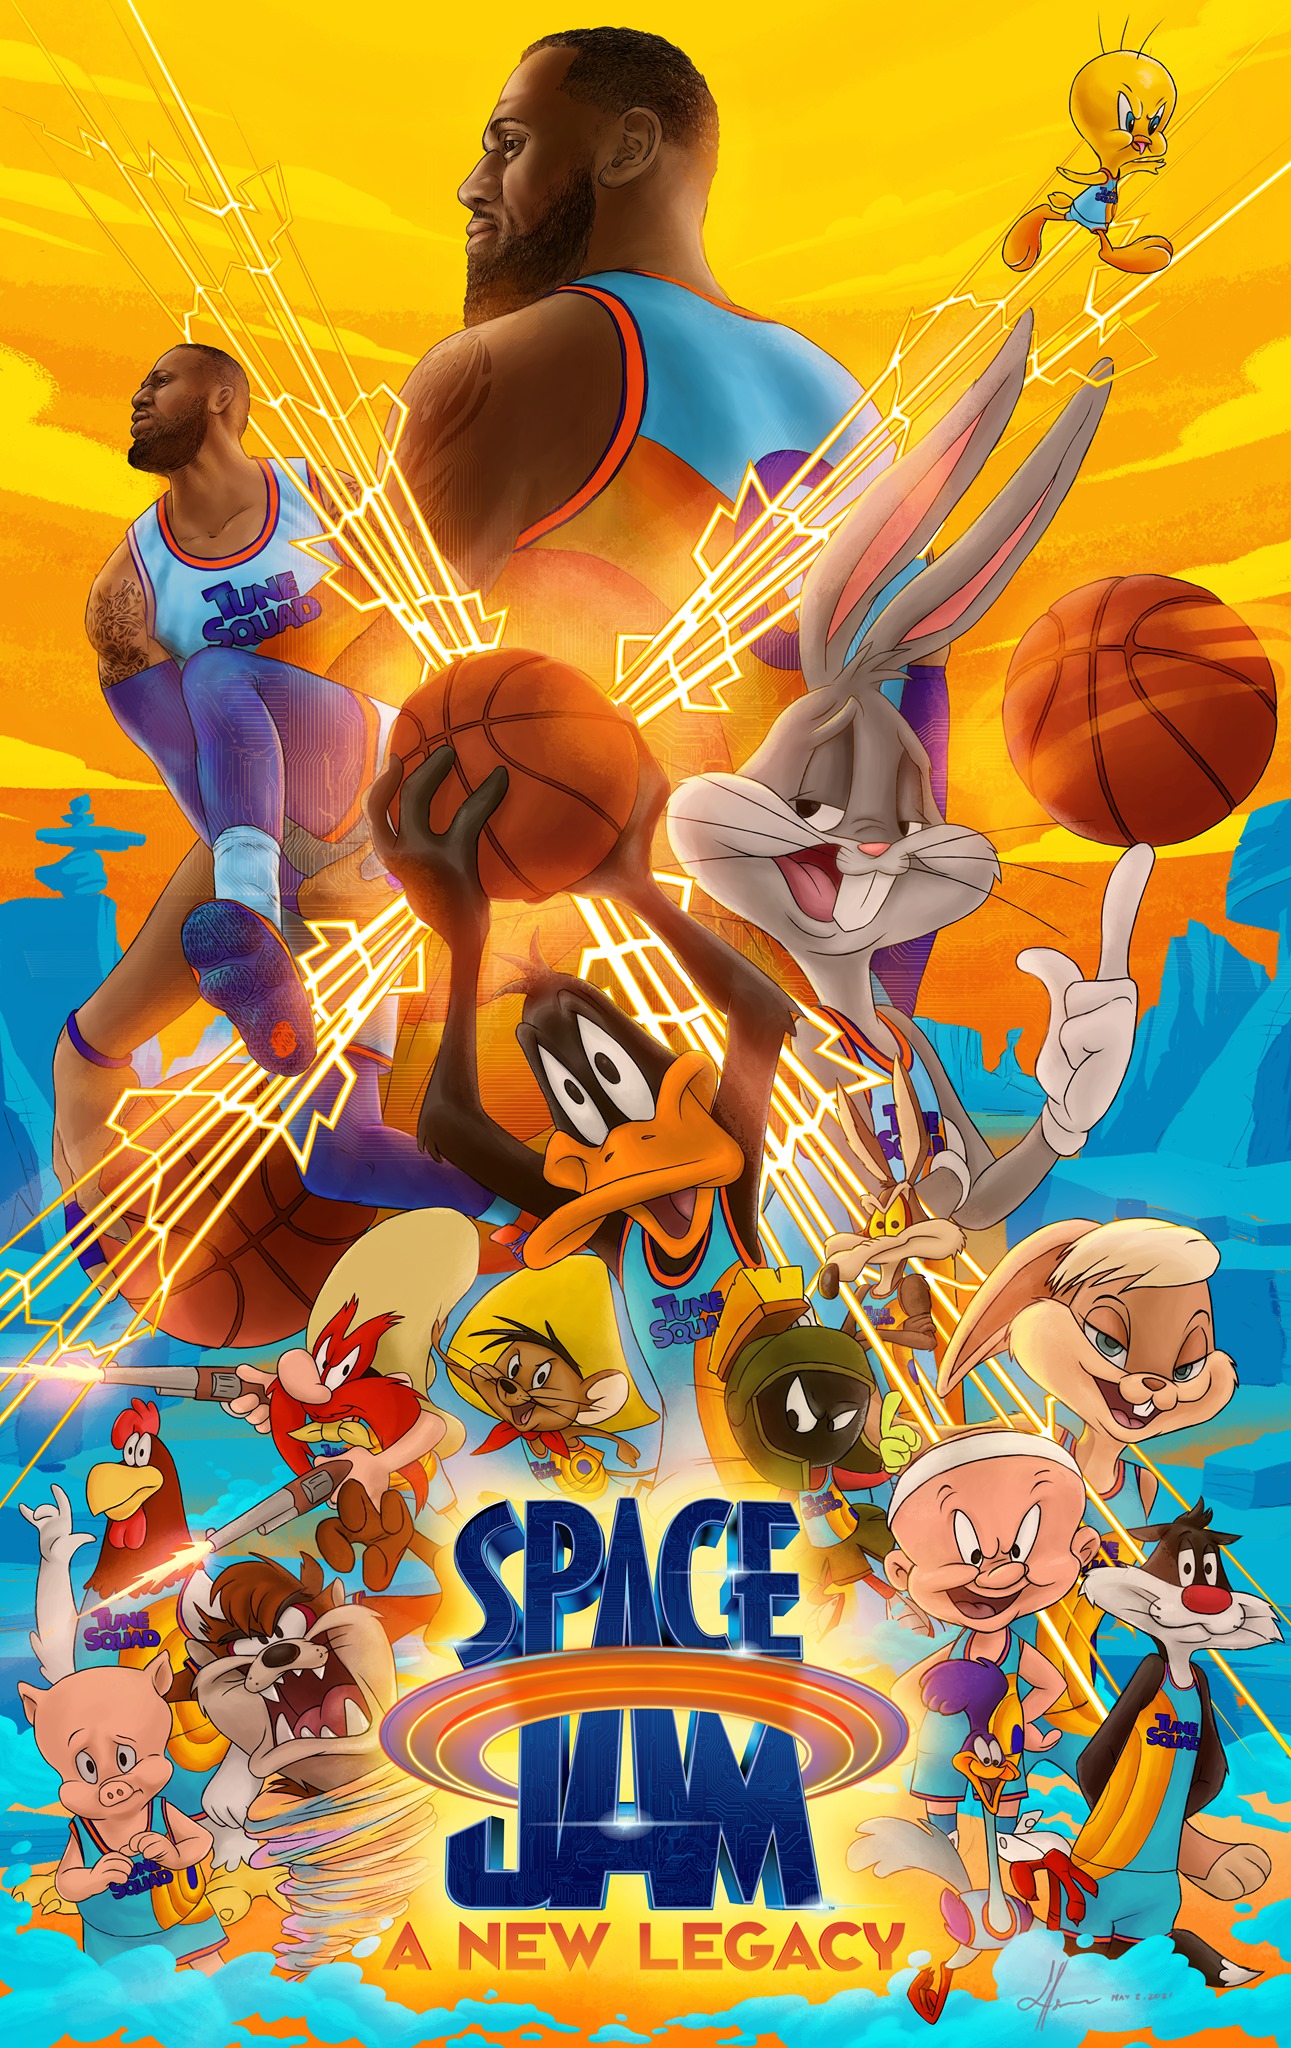 Space Jam A New Legacy Gallery - Jam Looney Bugs Rappler Assets2 Squad ...